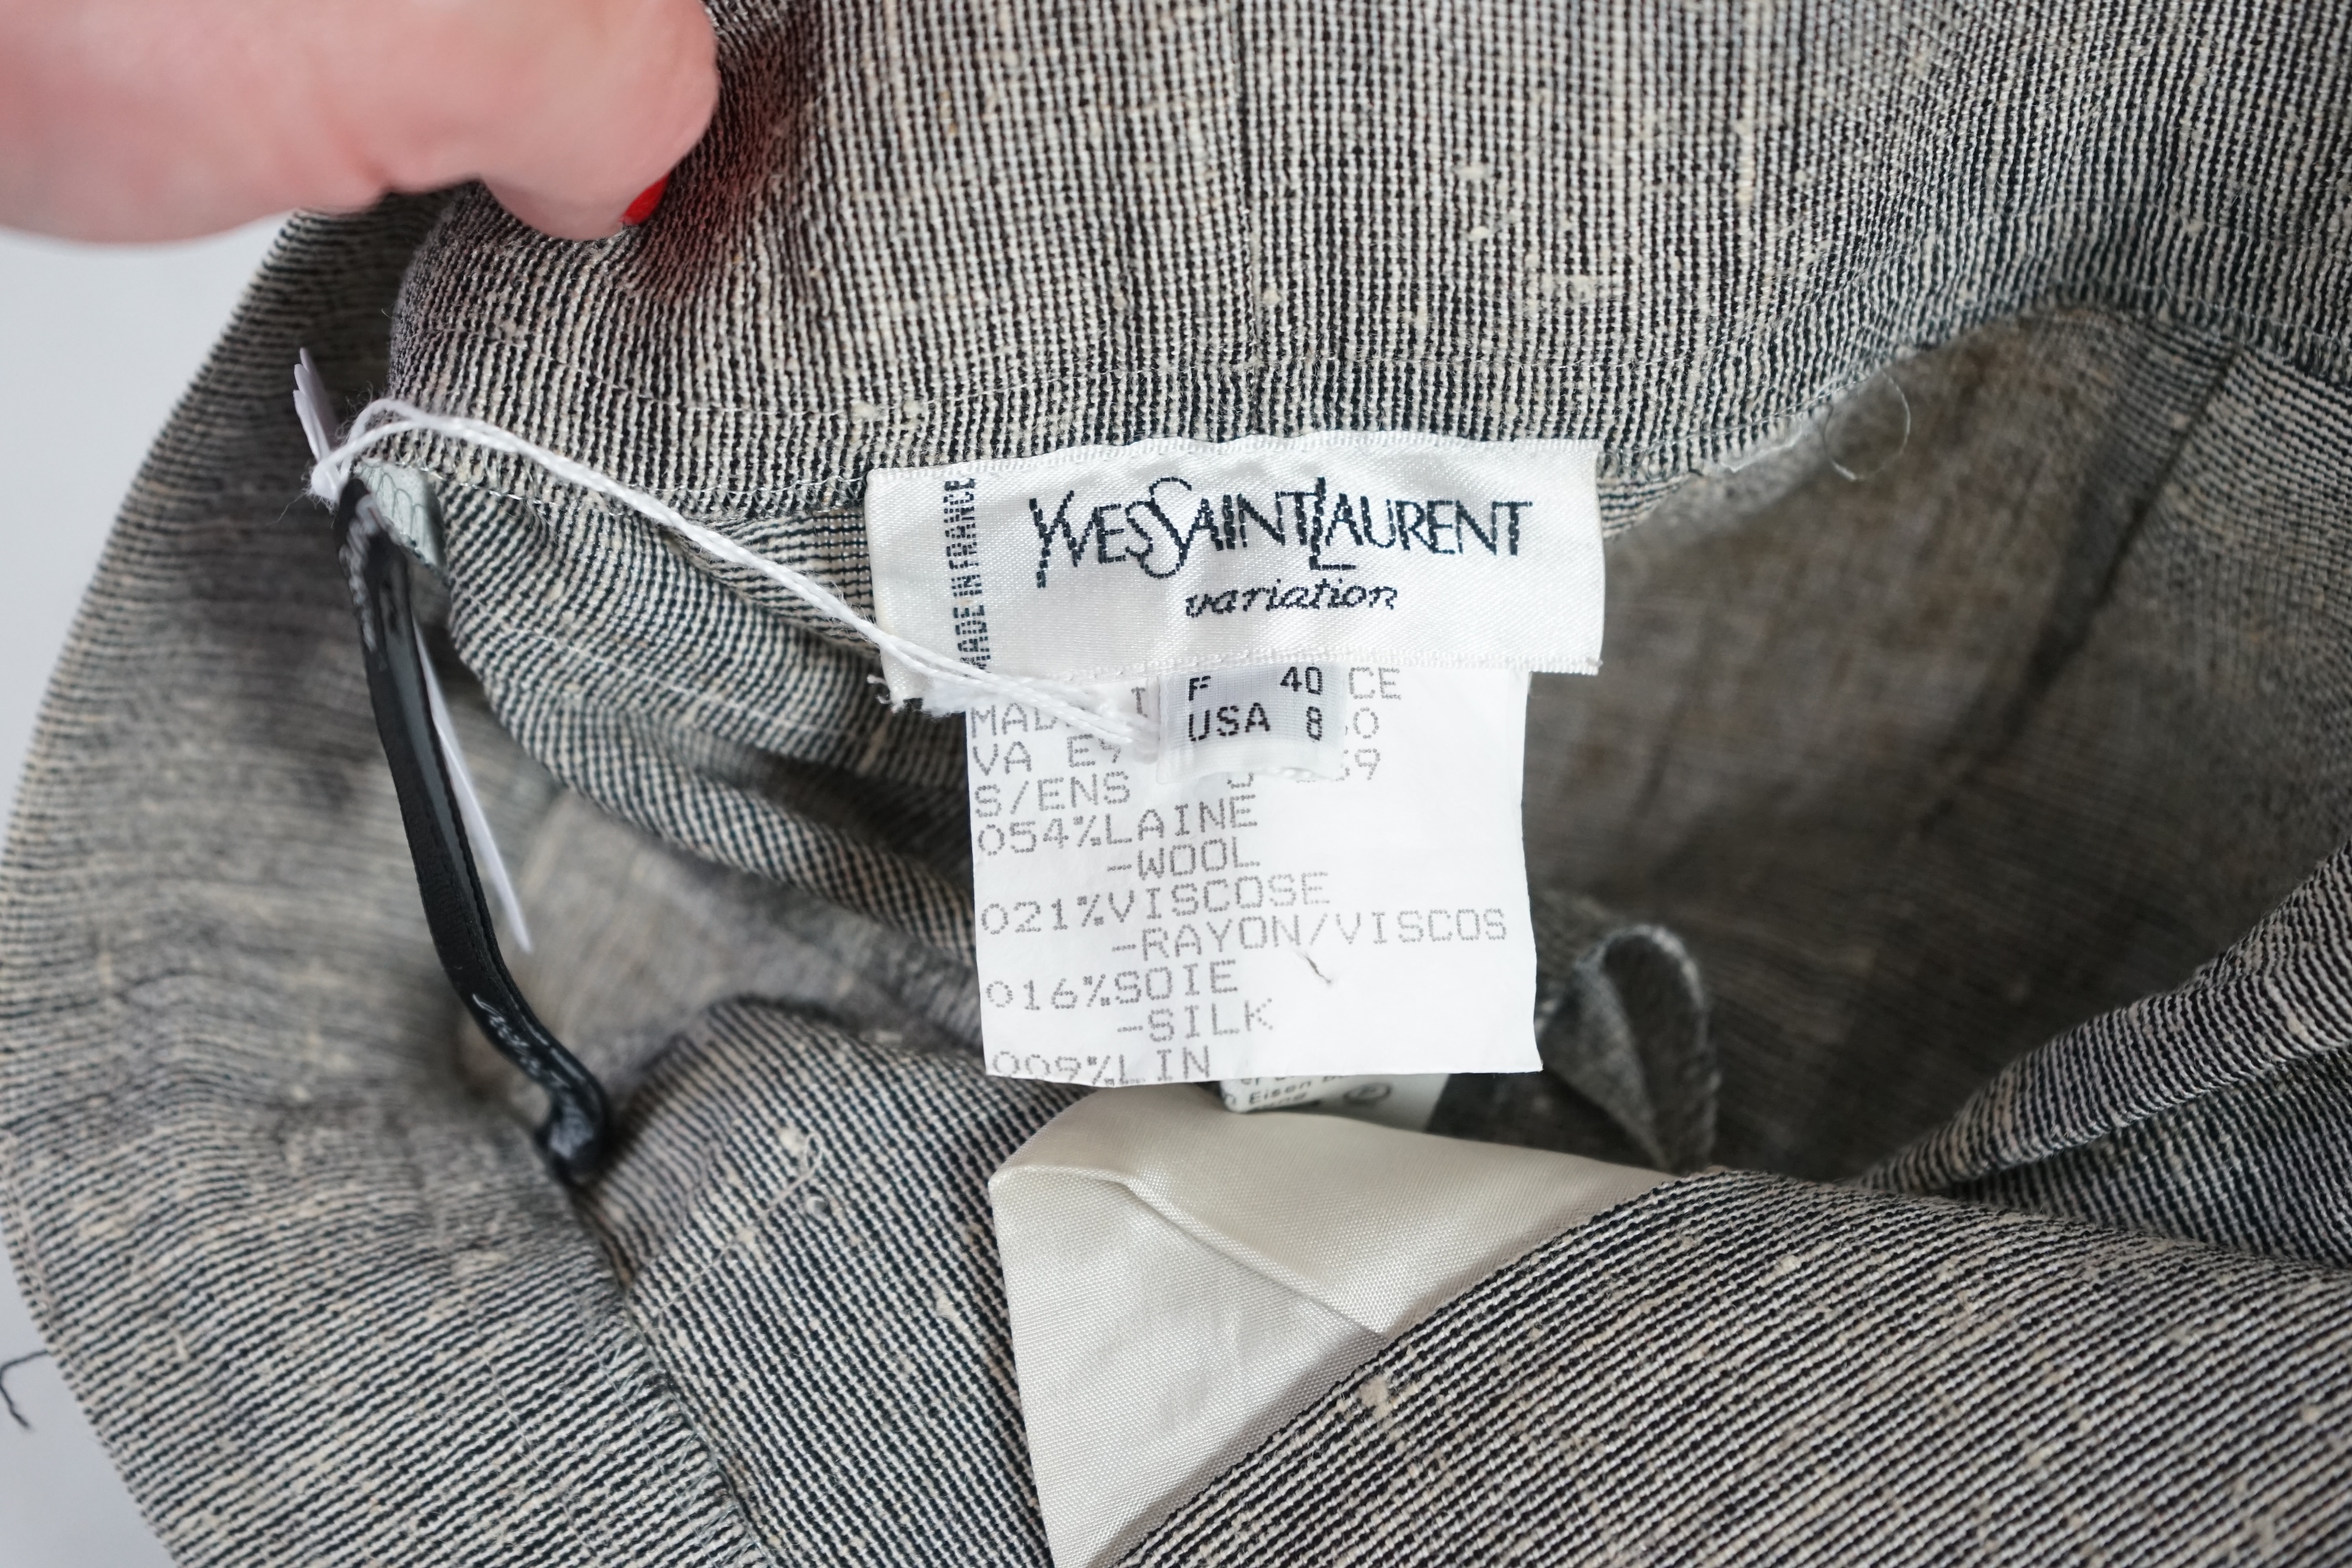 Two vintage Yves Saint Laurent variation lady's trouser suits, F 40 (UK 12). Please note alterations to make the waist smaller may have been carried out on some of the skirts. Proceeds to Happy Paws Puppy Rescue.